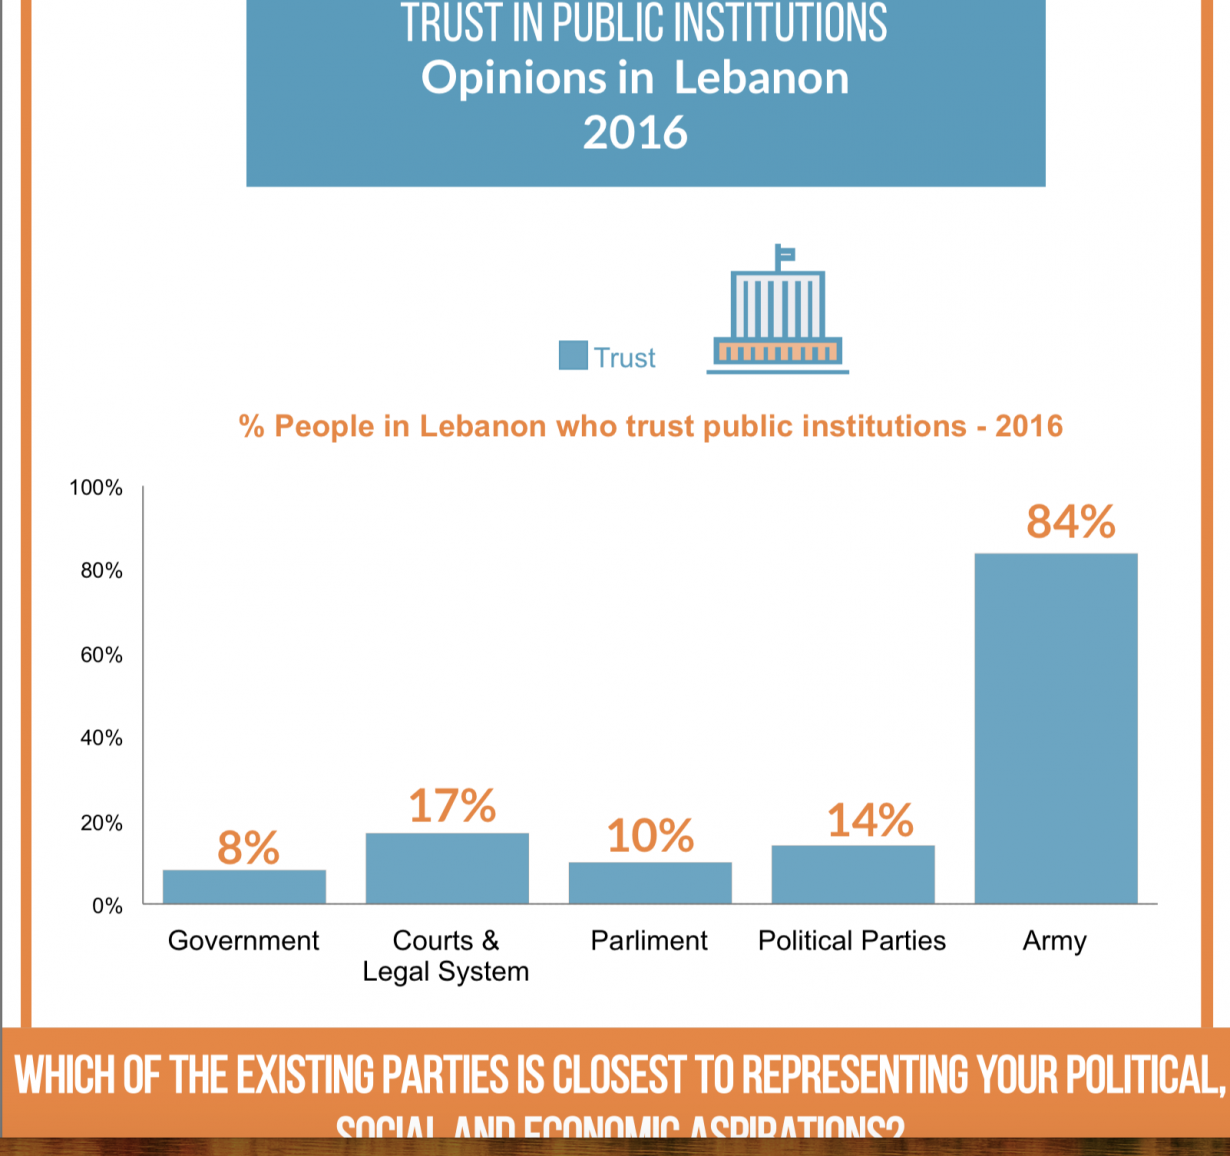 What are the political attitudes of citizens in Lebanon?